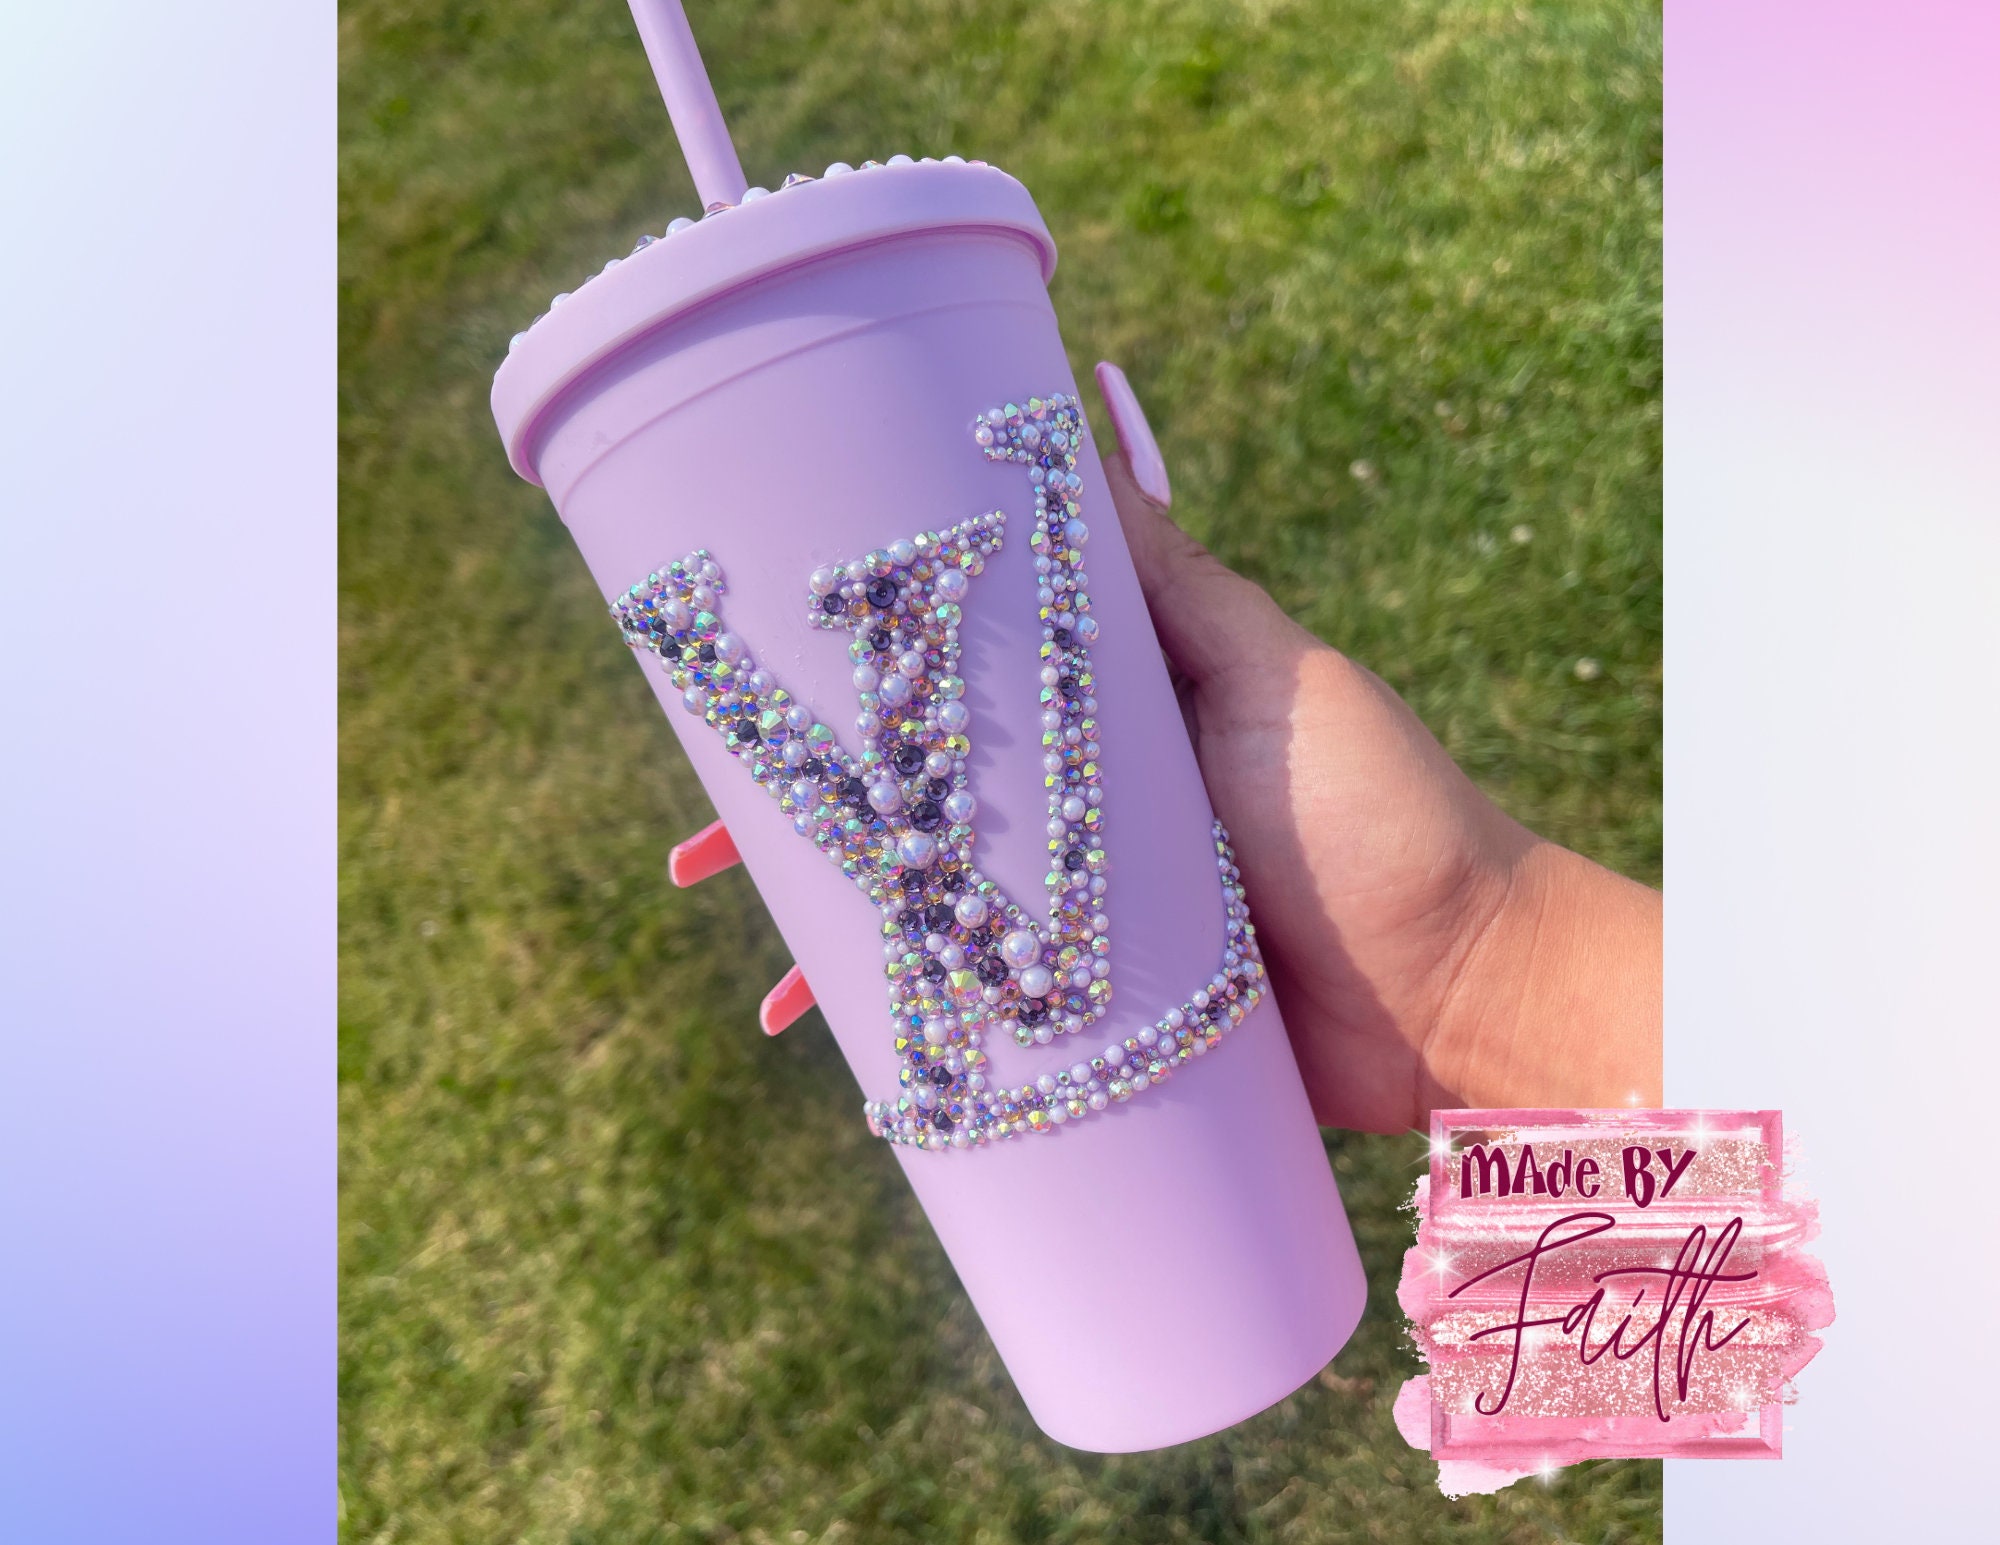 22 oz bedazzled tumbler, double walled tumbler, Rhinestone cups, Blinged  tumblers, Purple, Pearls, Aesthetic, Design Luxury Tumblers, Matte